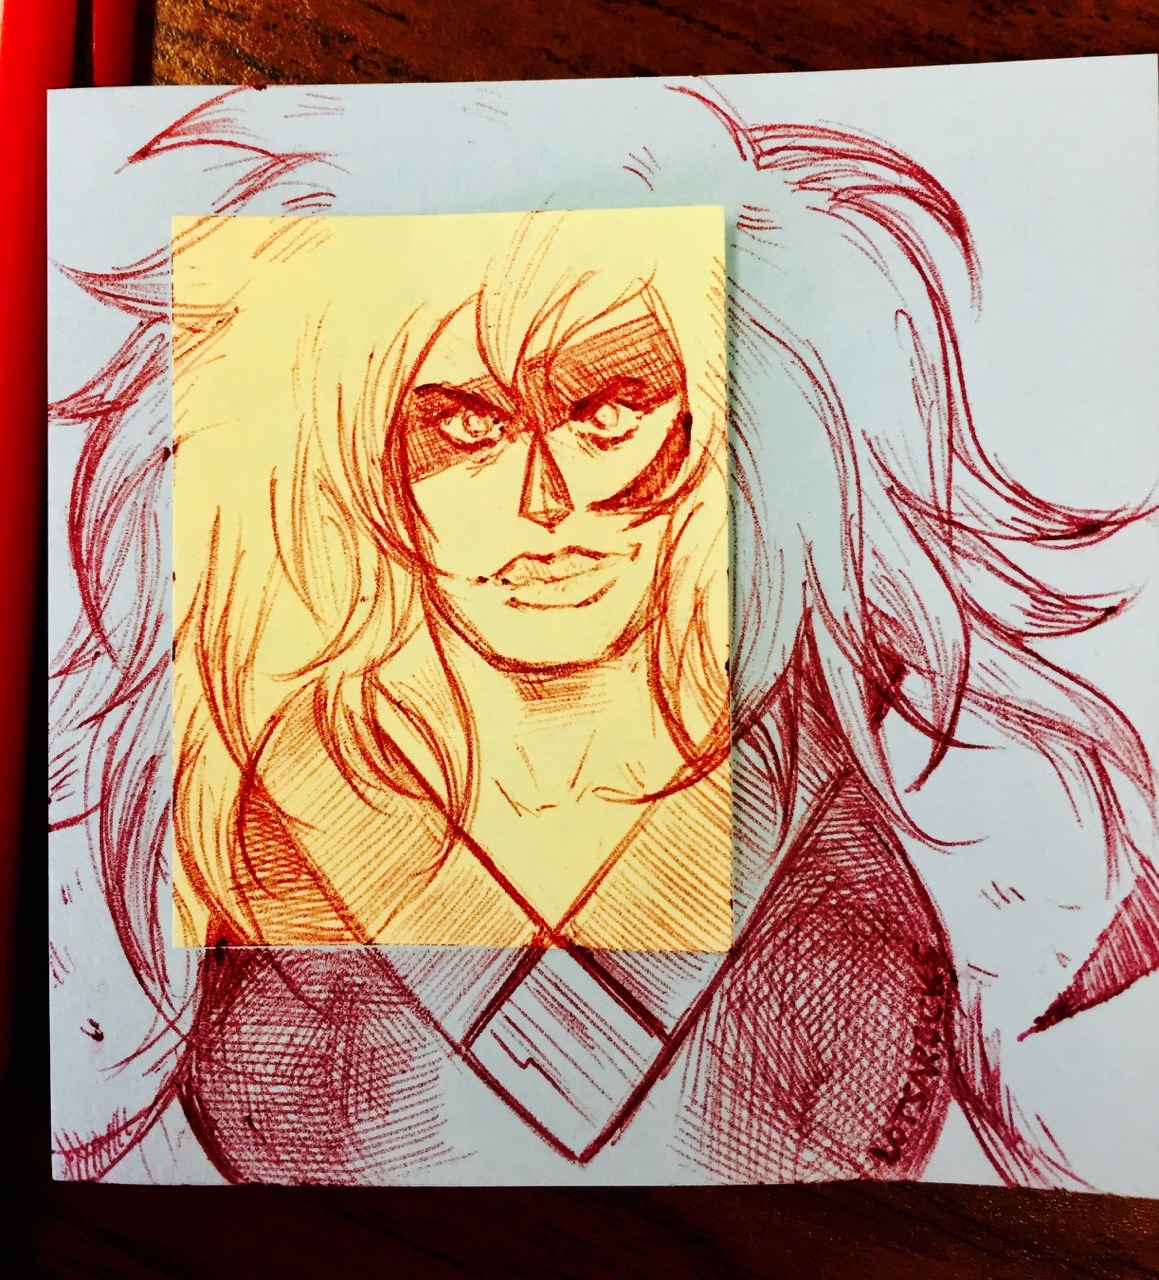 Post it note beef! Too much hair and muscle for my humble office supplies to bear!